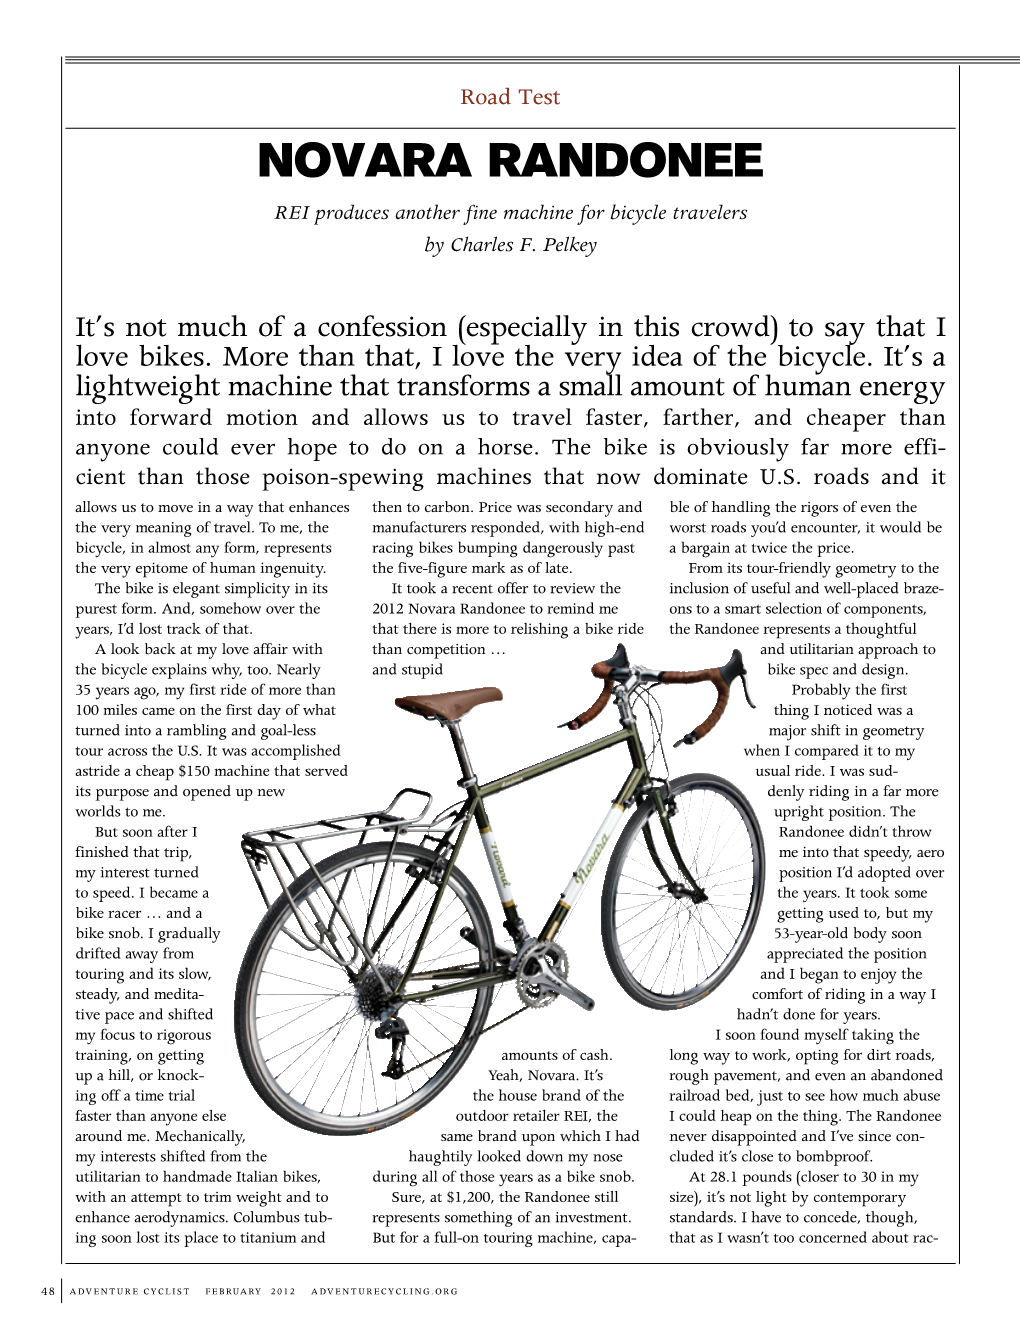 Novara Randonee REI Produces Another Fine Machine for Bicycle Travelers by Charles F